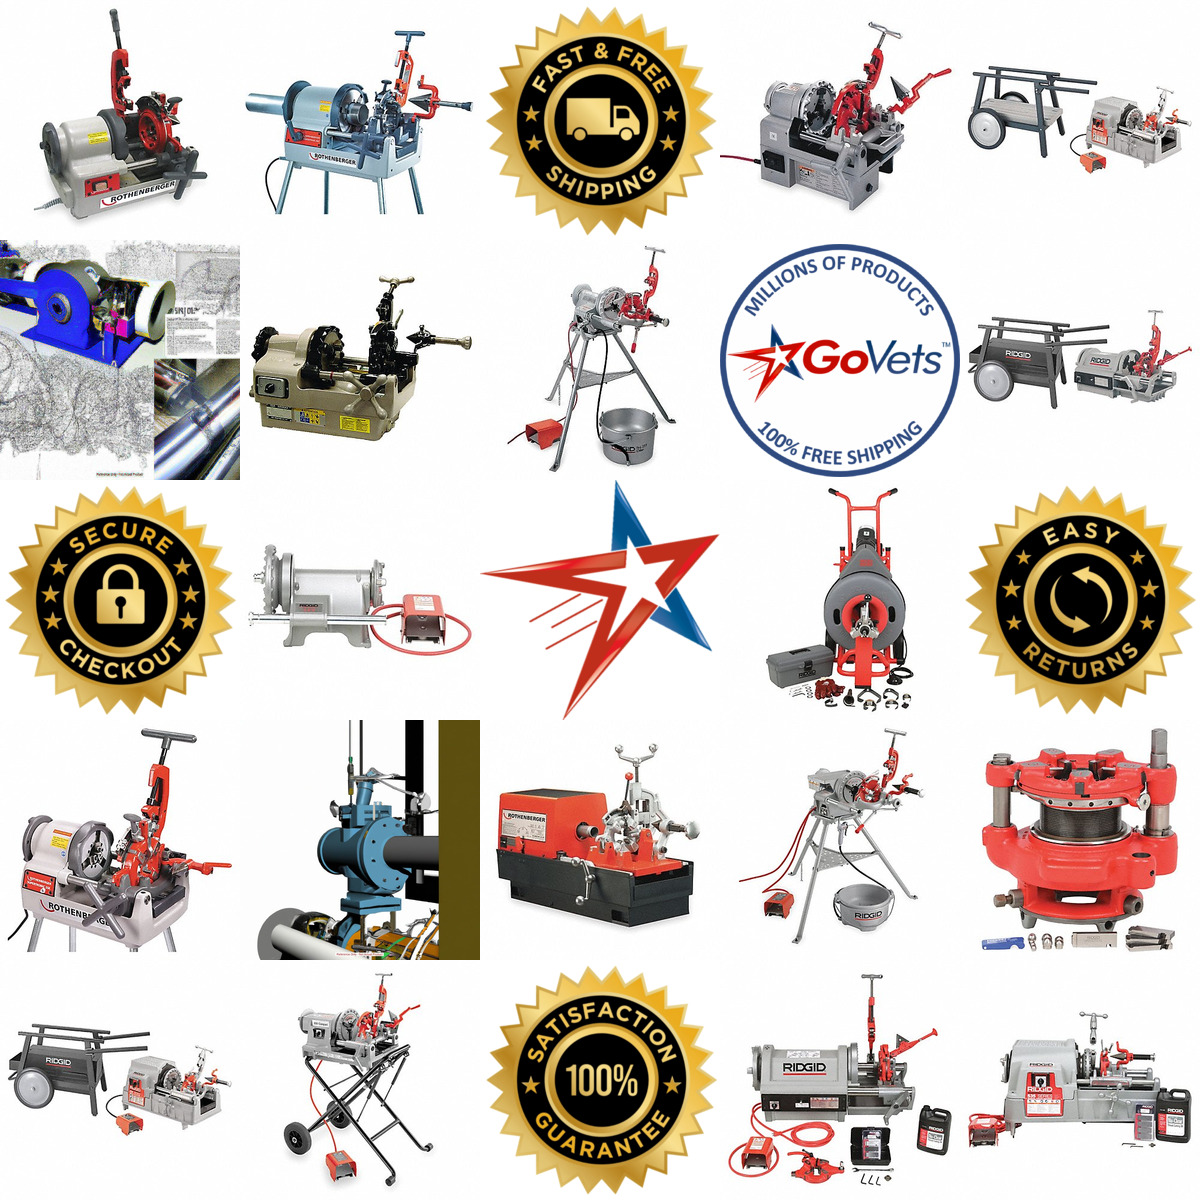 A selection of Pipe Threading Machines products on GoVets